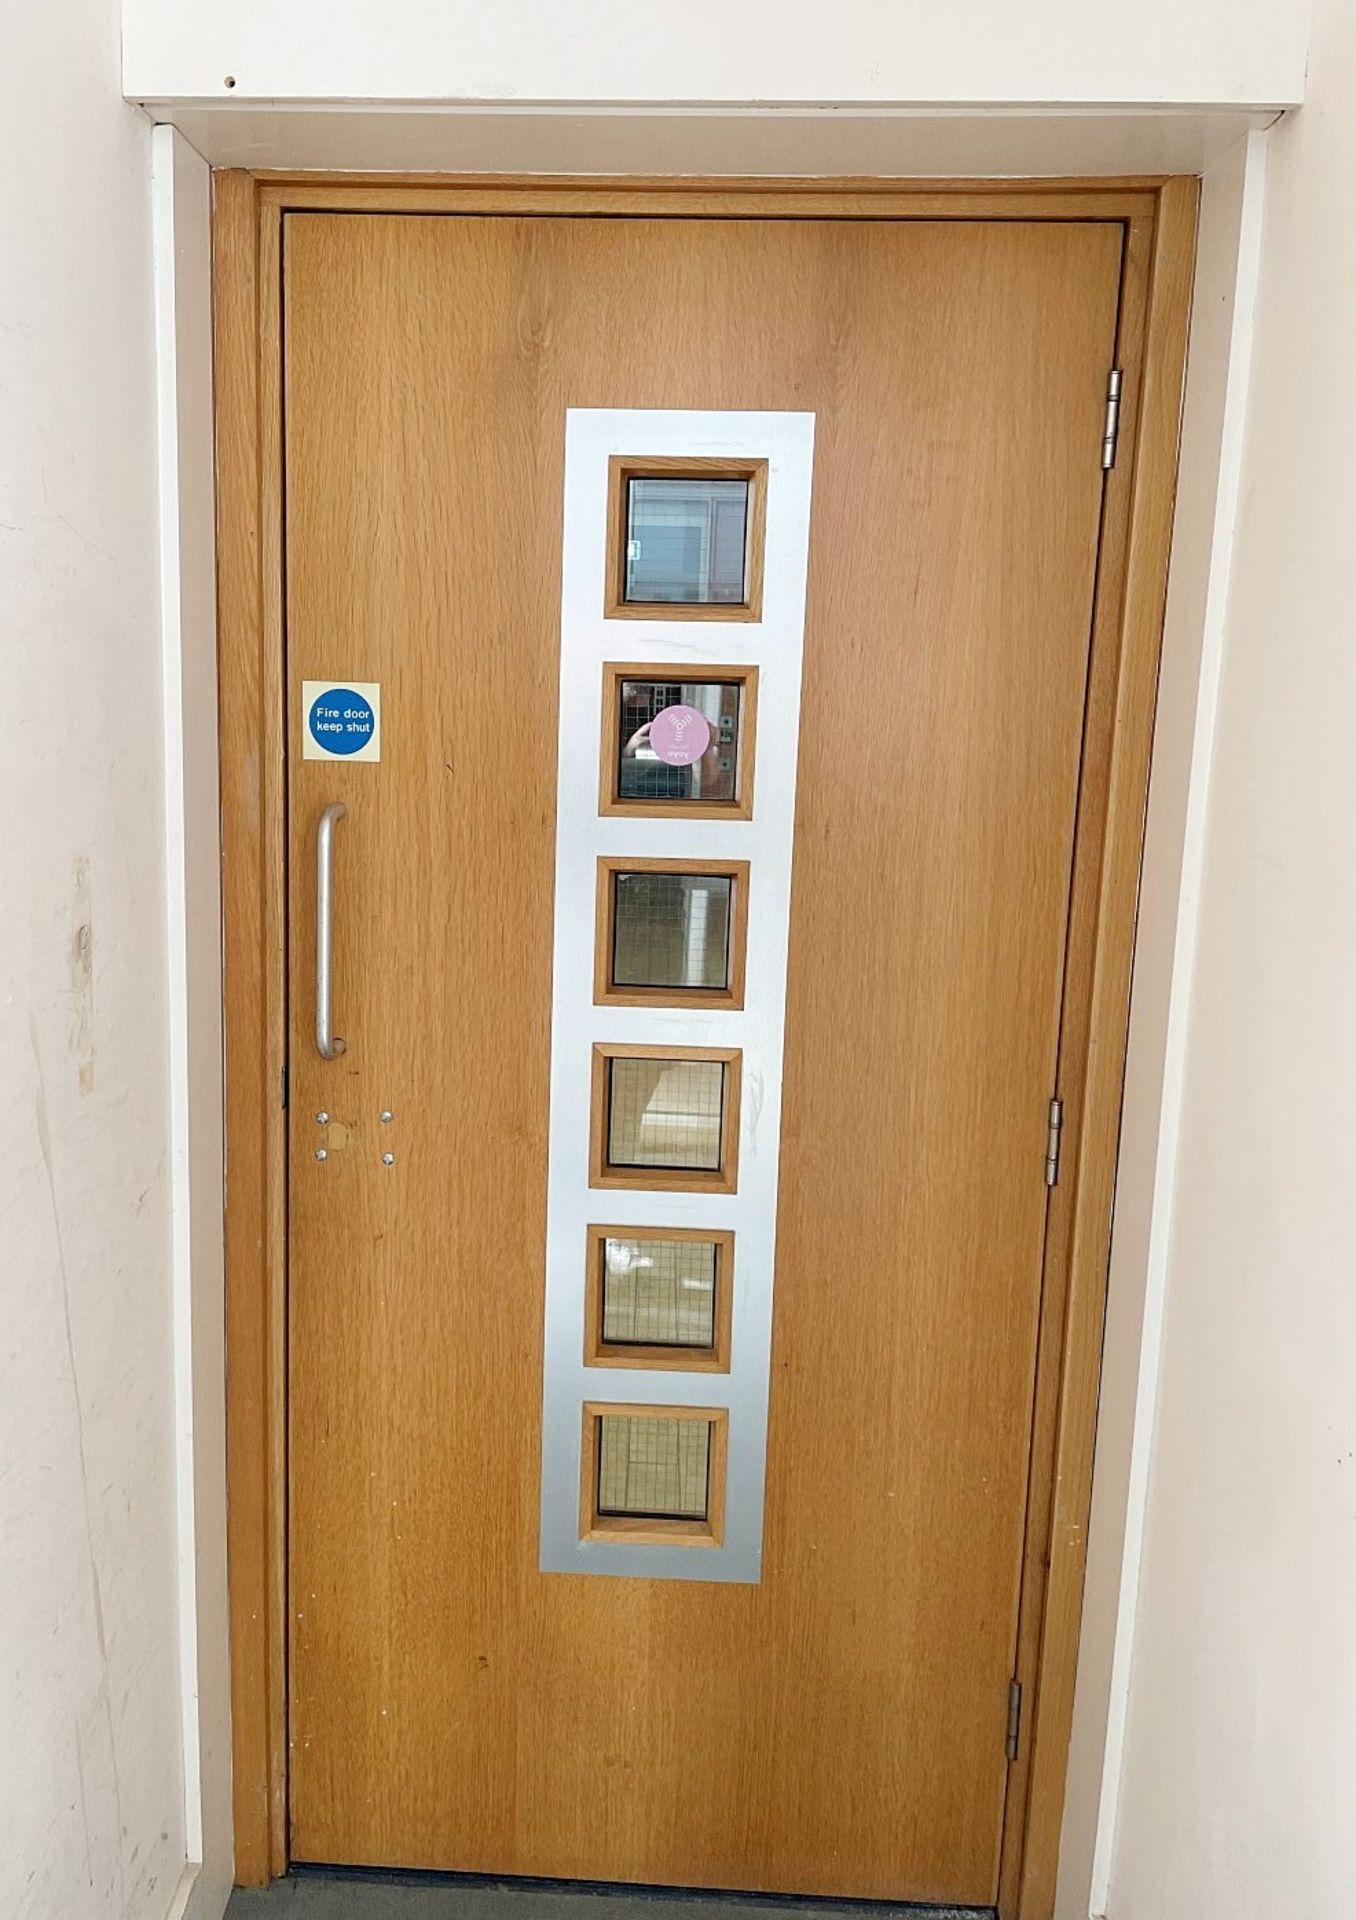 1 x Fire Door With Frame, Closer And Push To Open Button Emergency Pad - Dimensions: W104 x H229cm - - Image 3 of 6